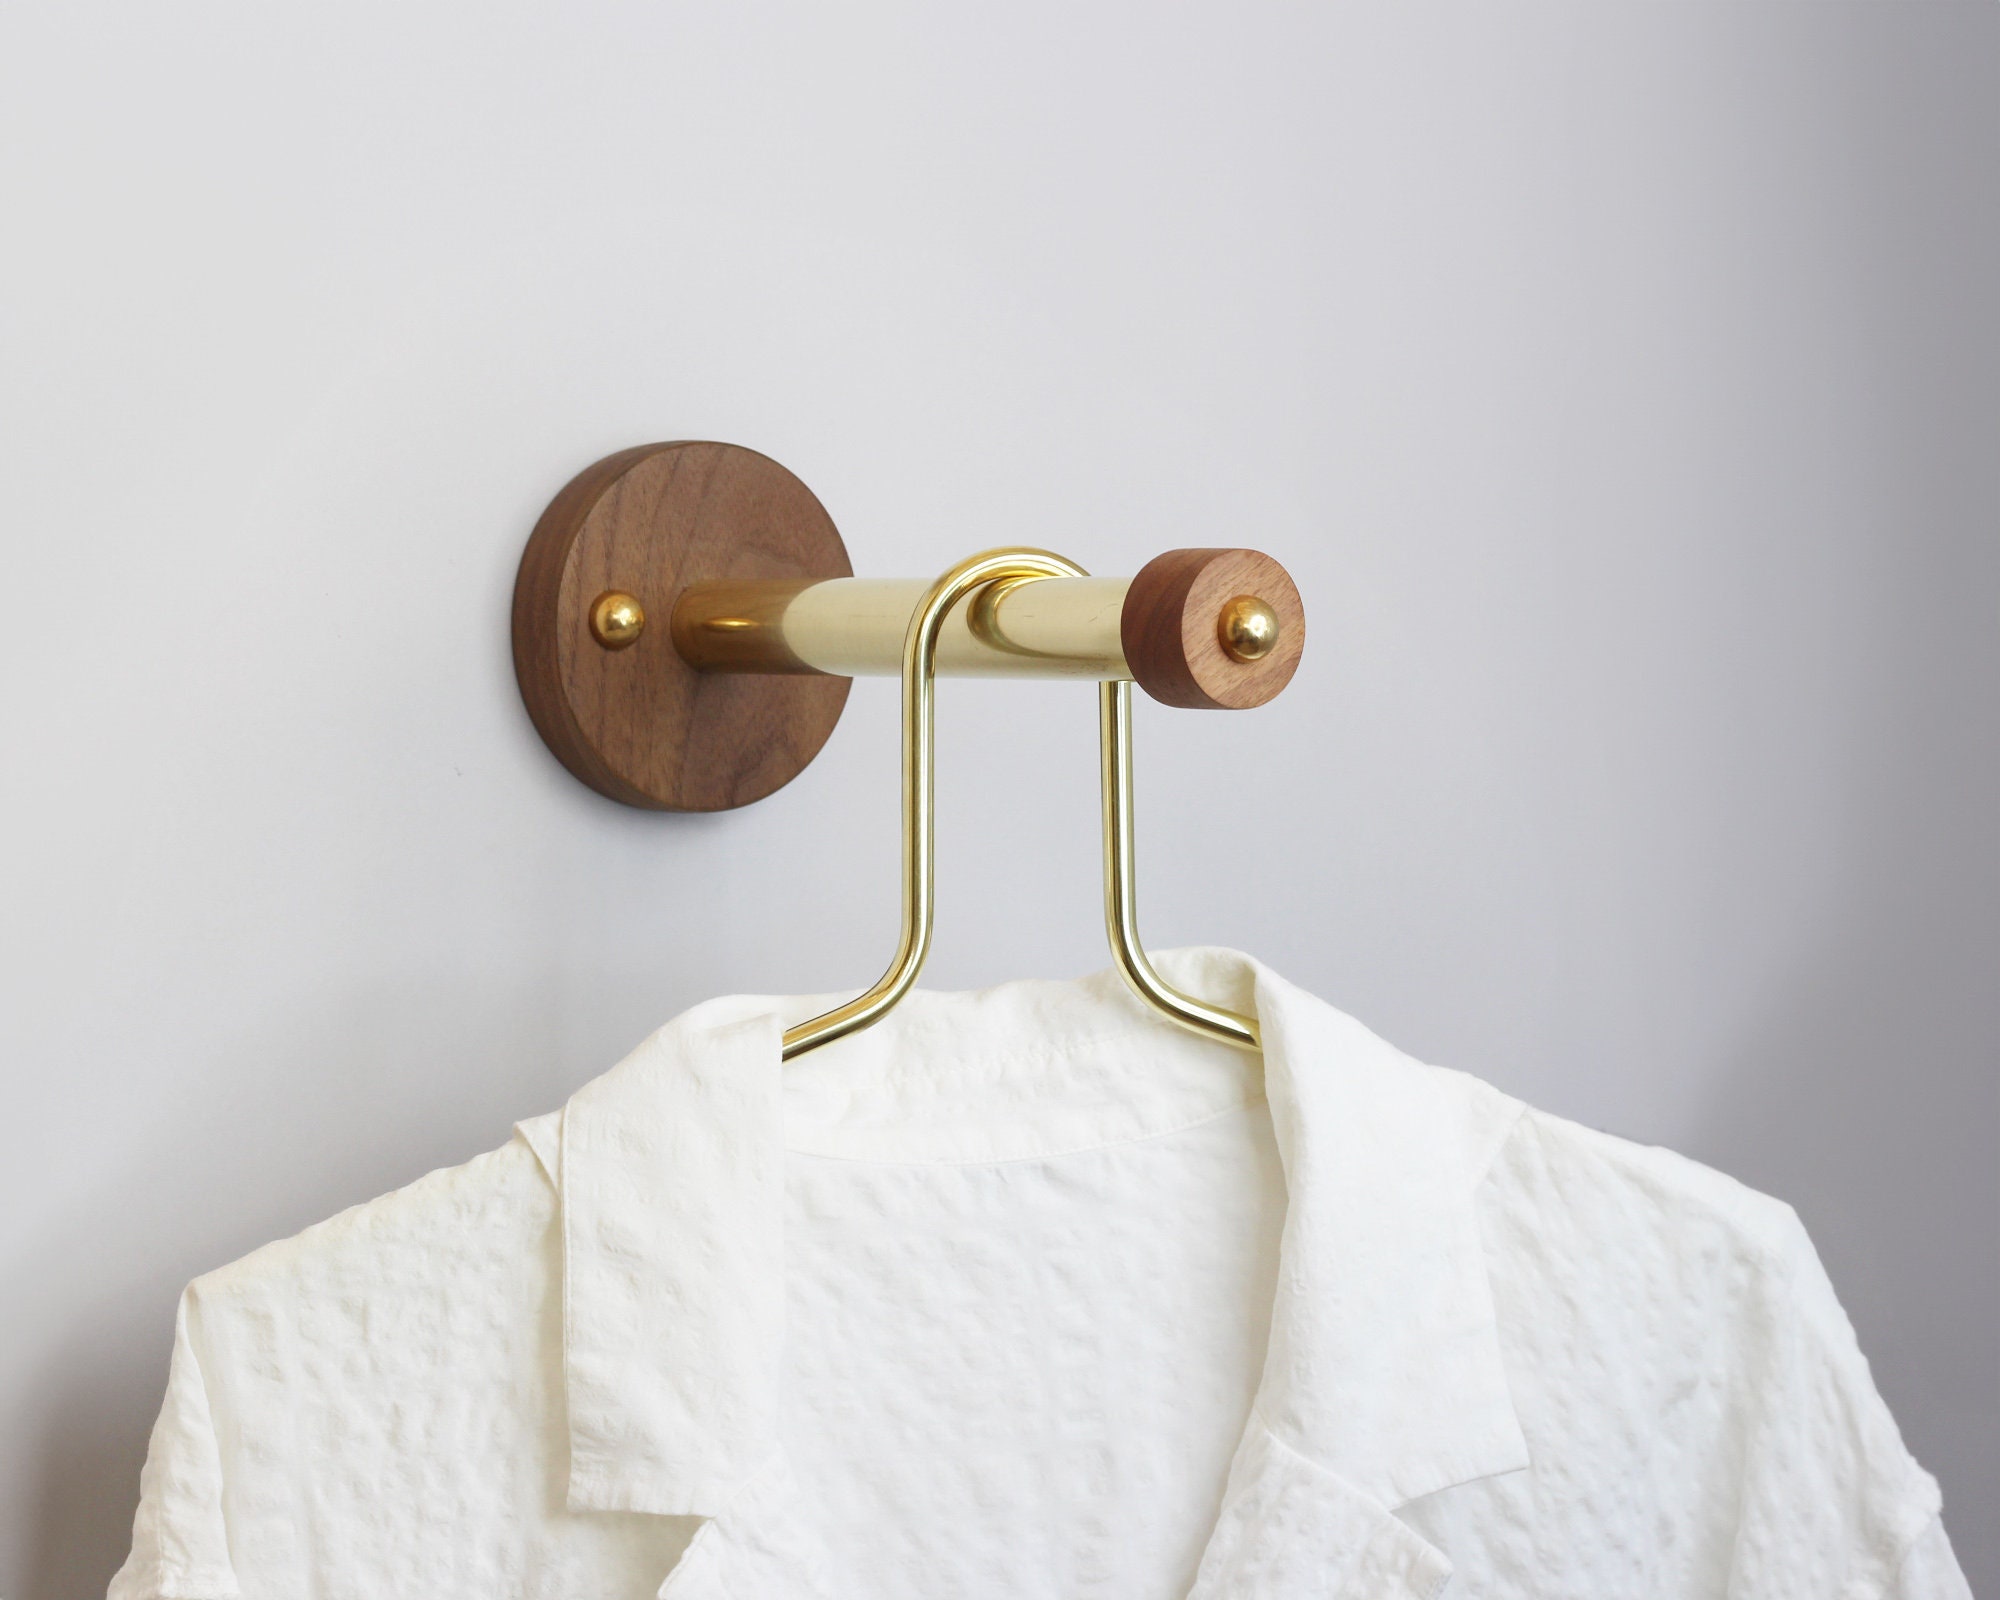 Vintage Clothes Hanger With Brass Hooks and Walnut Wood, Perfect for  Weddings and Scarf Display 